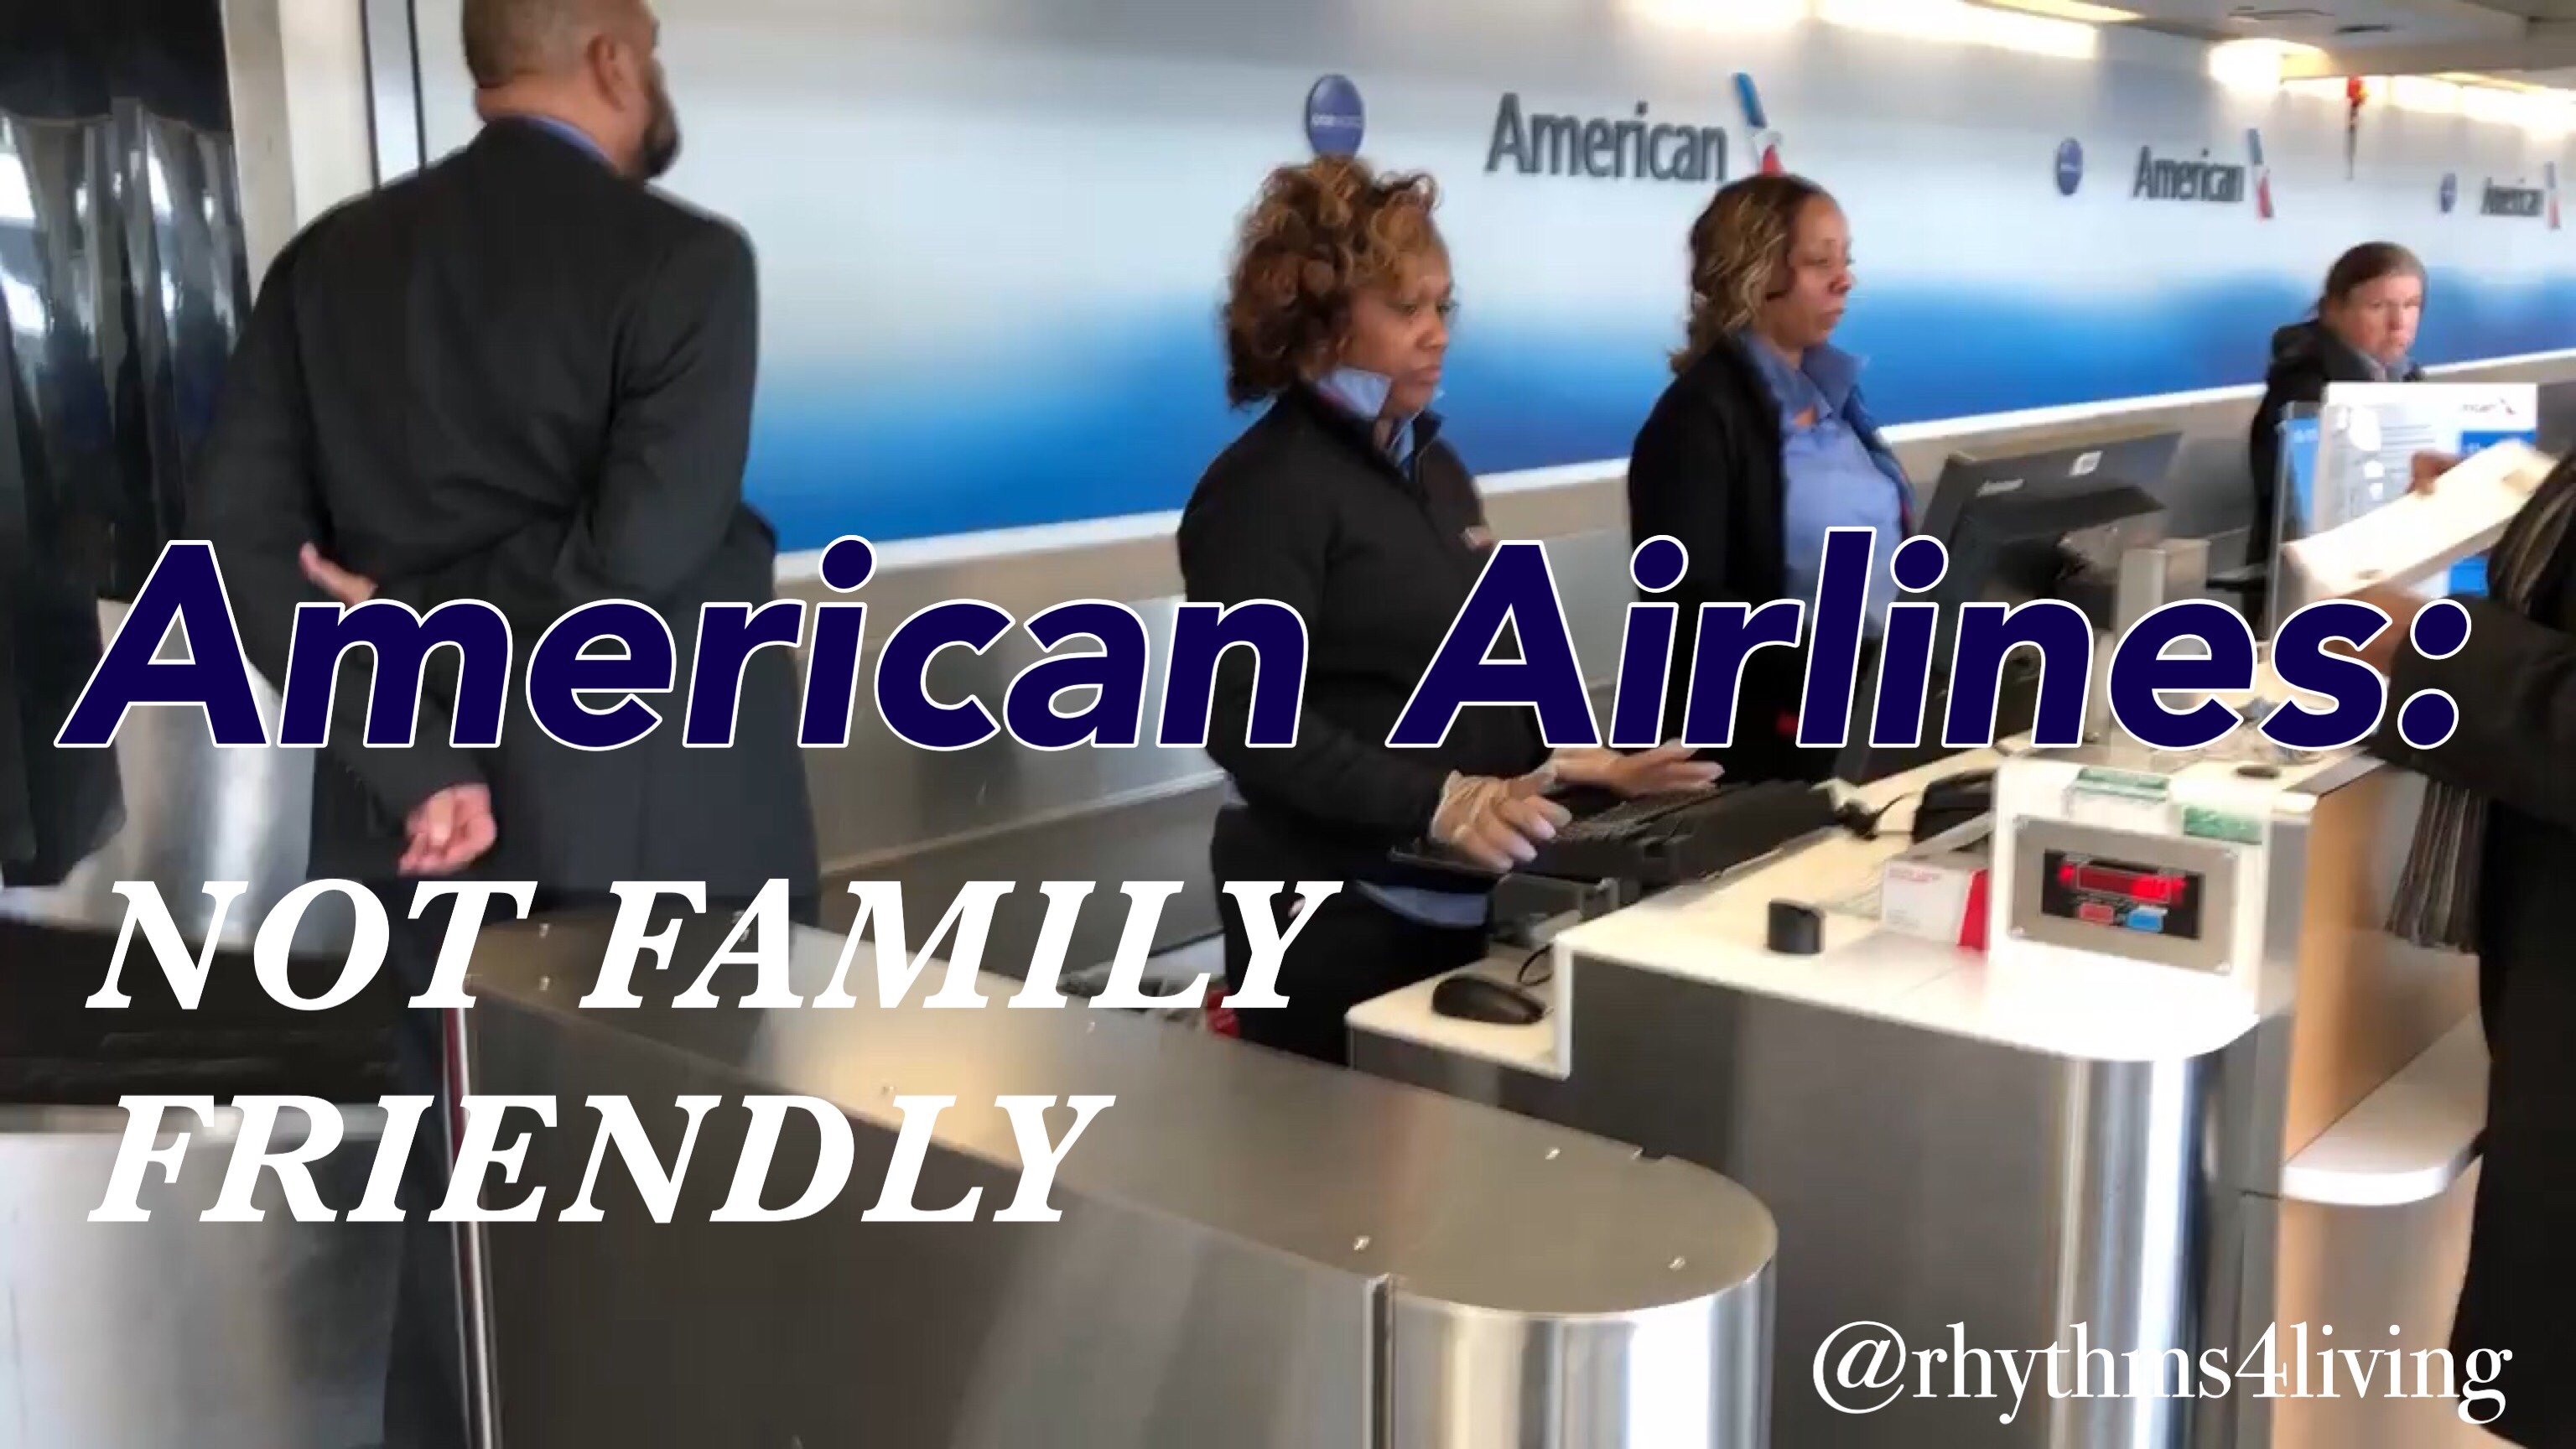 American Airlines not family friendly, stroller policy